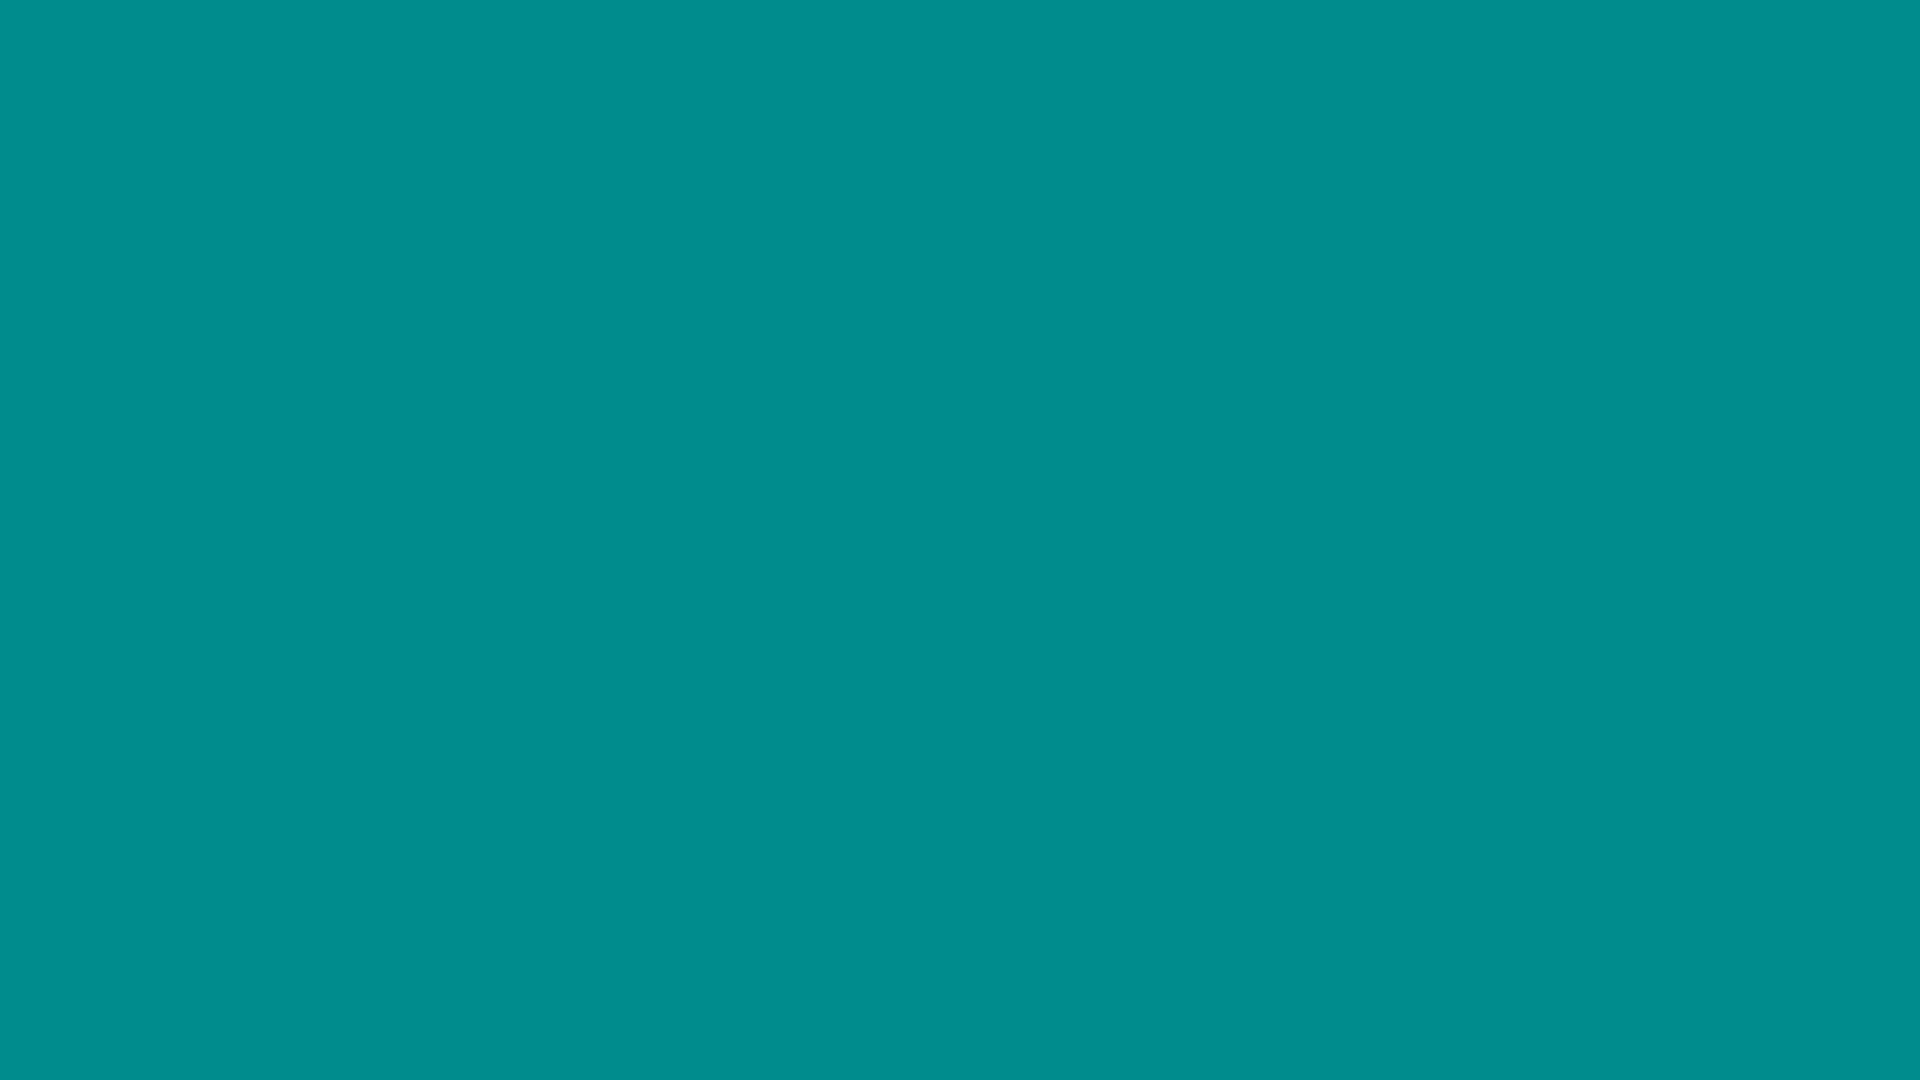 Plain Soid Dark Cyan Bhackground Image: Free Download Vector, Image, PNG, PSD Files